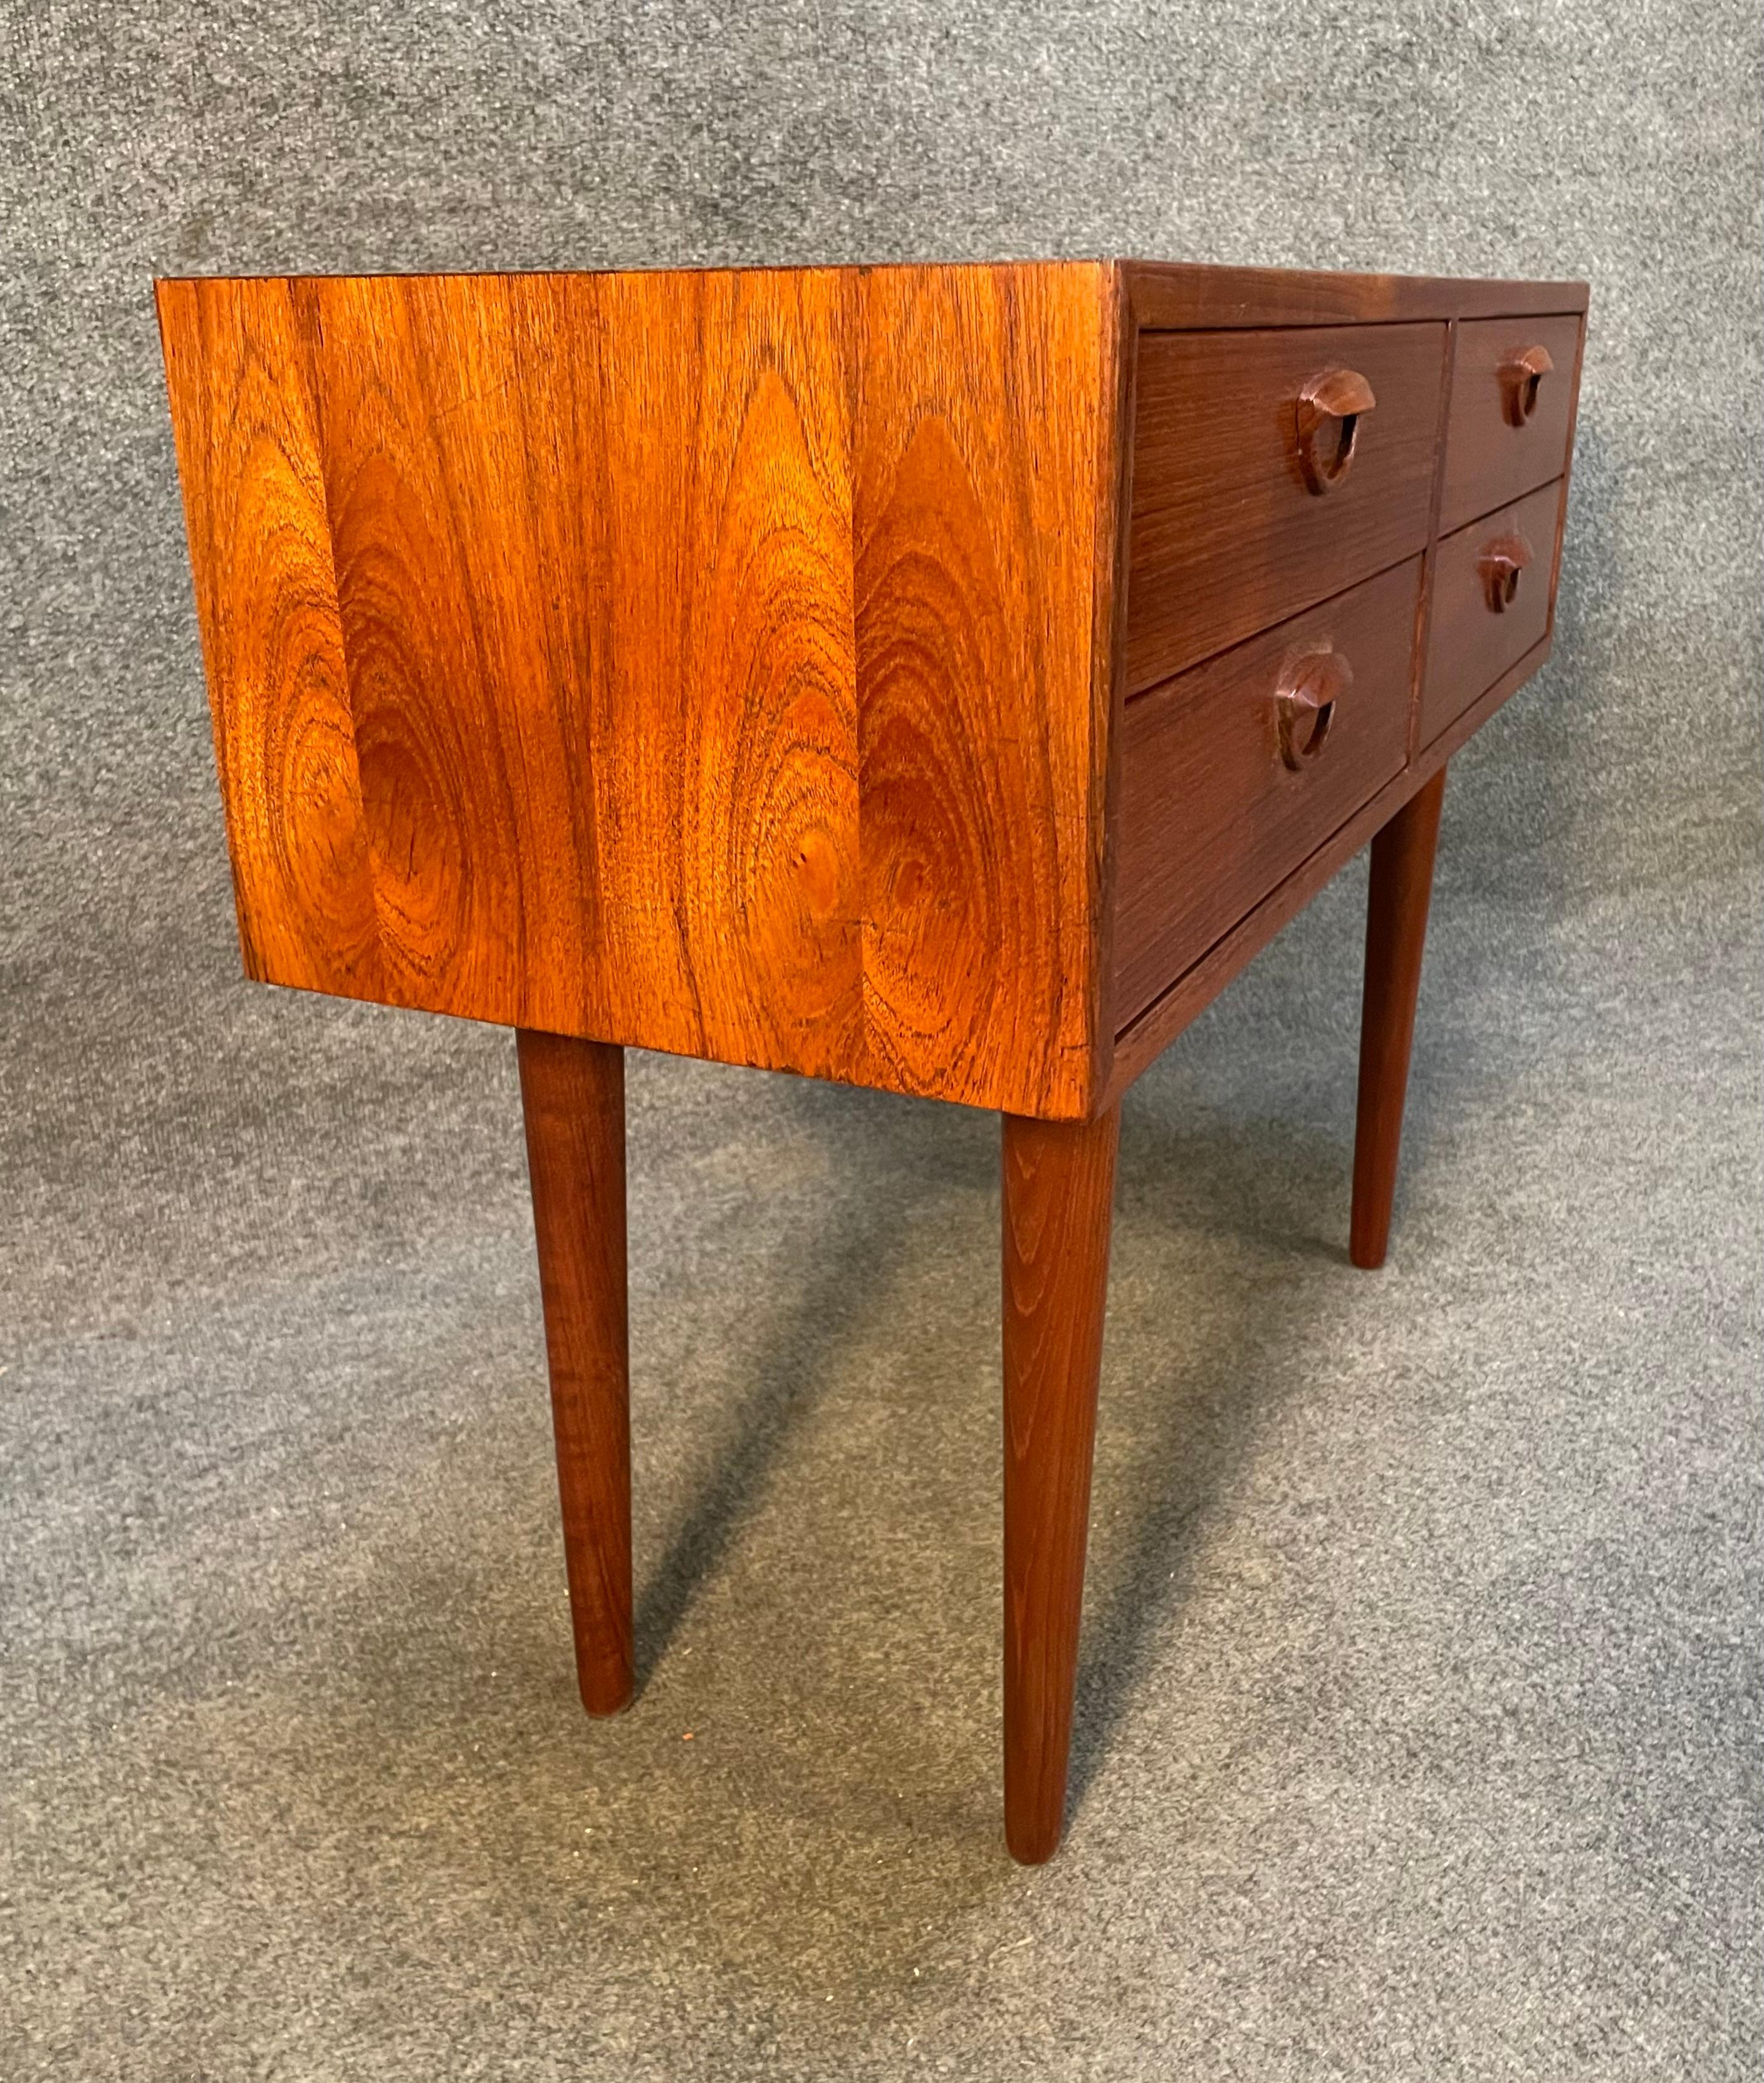 Here is a beautiful Scandinavian modern chest of drawers in teak wood designed by Kai Kristiansen and manufactured by Feldballes Mobelfabrik in Denmark inn the 1960's.
This lovely piece, recently imported from Europe to California before its